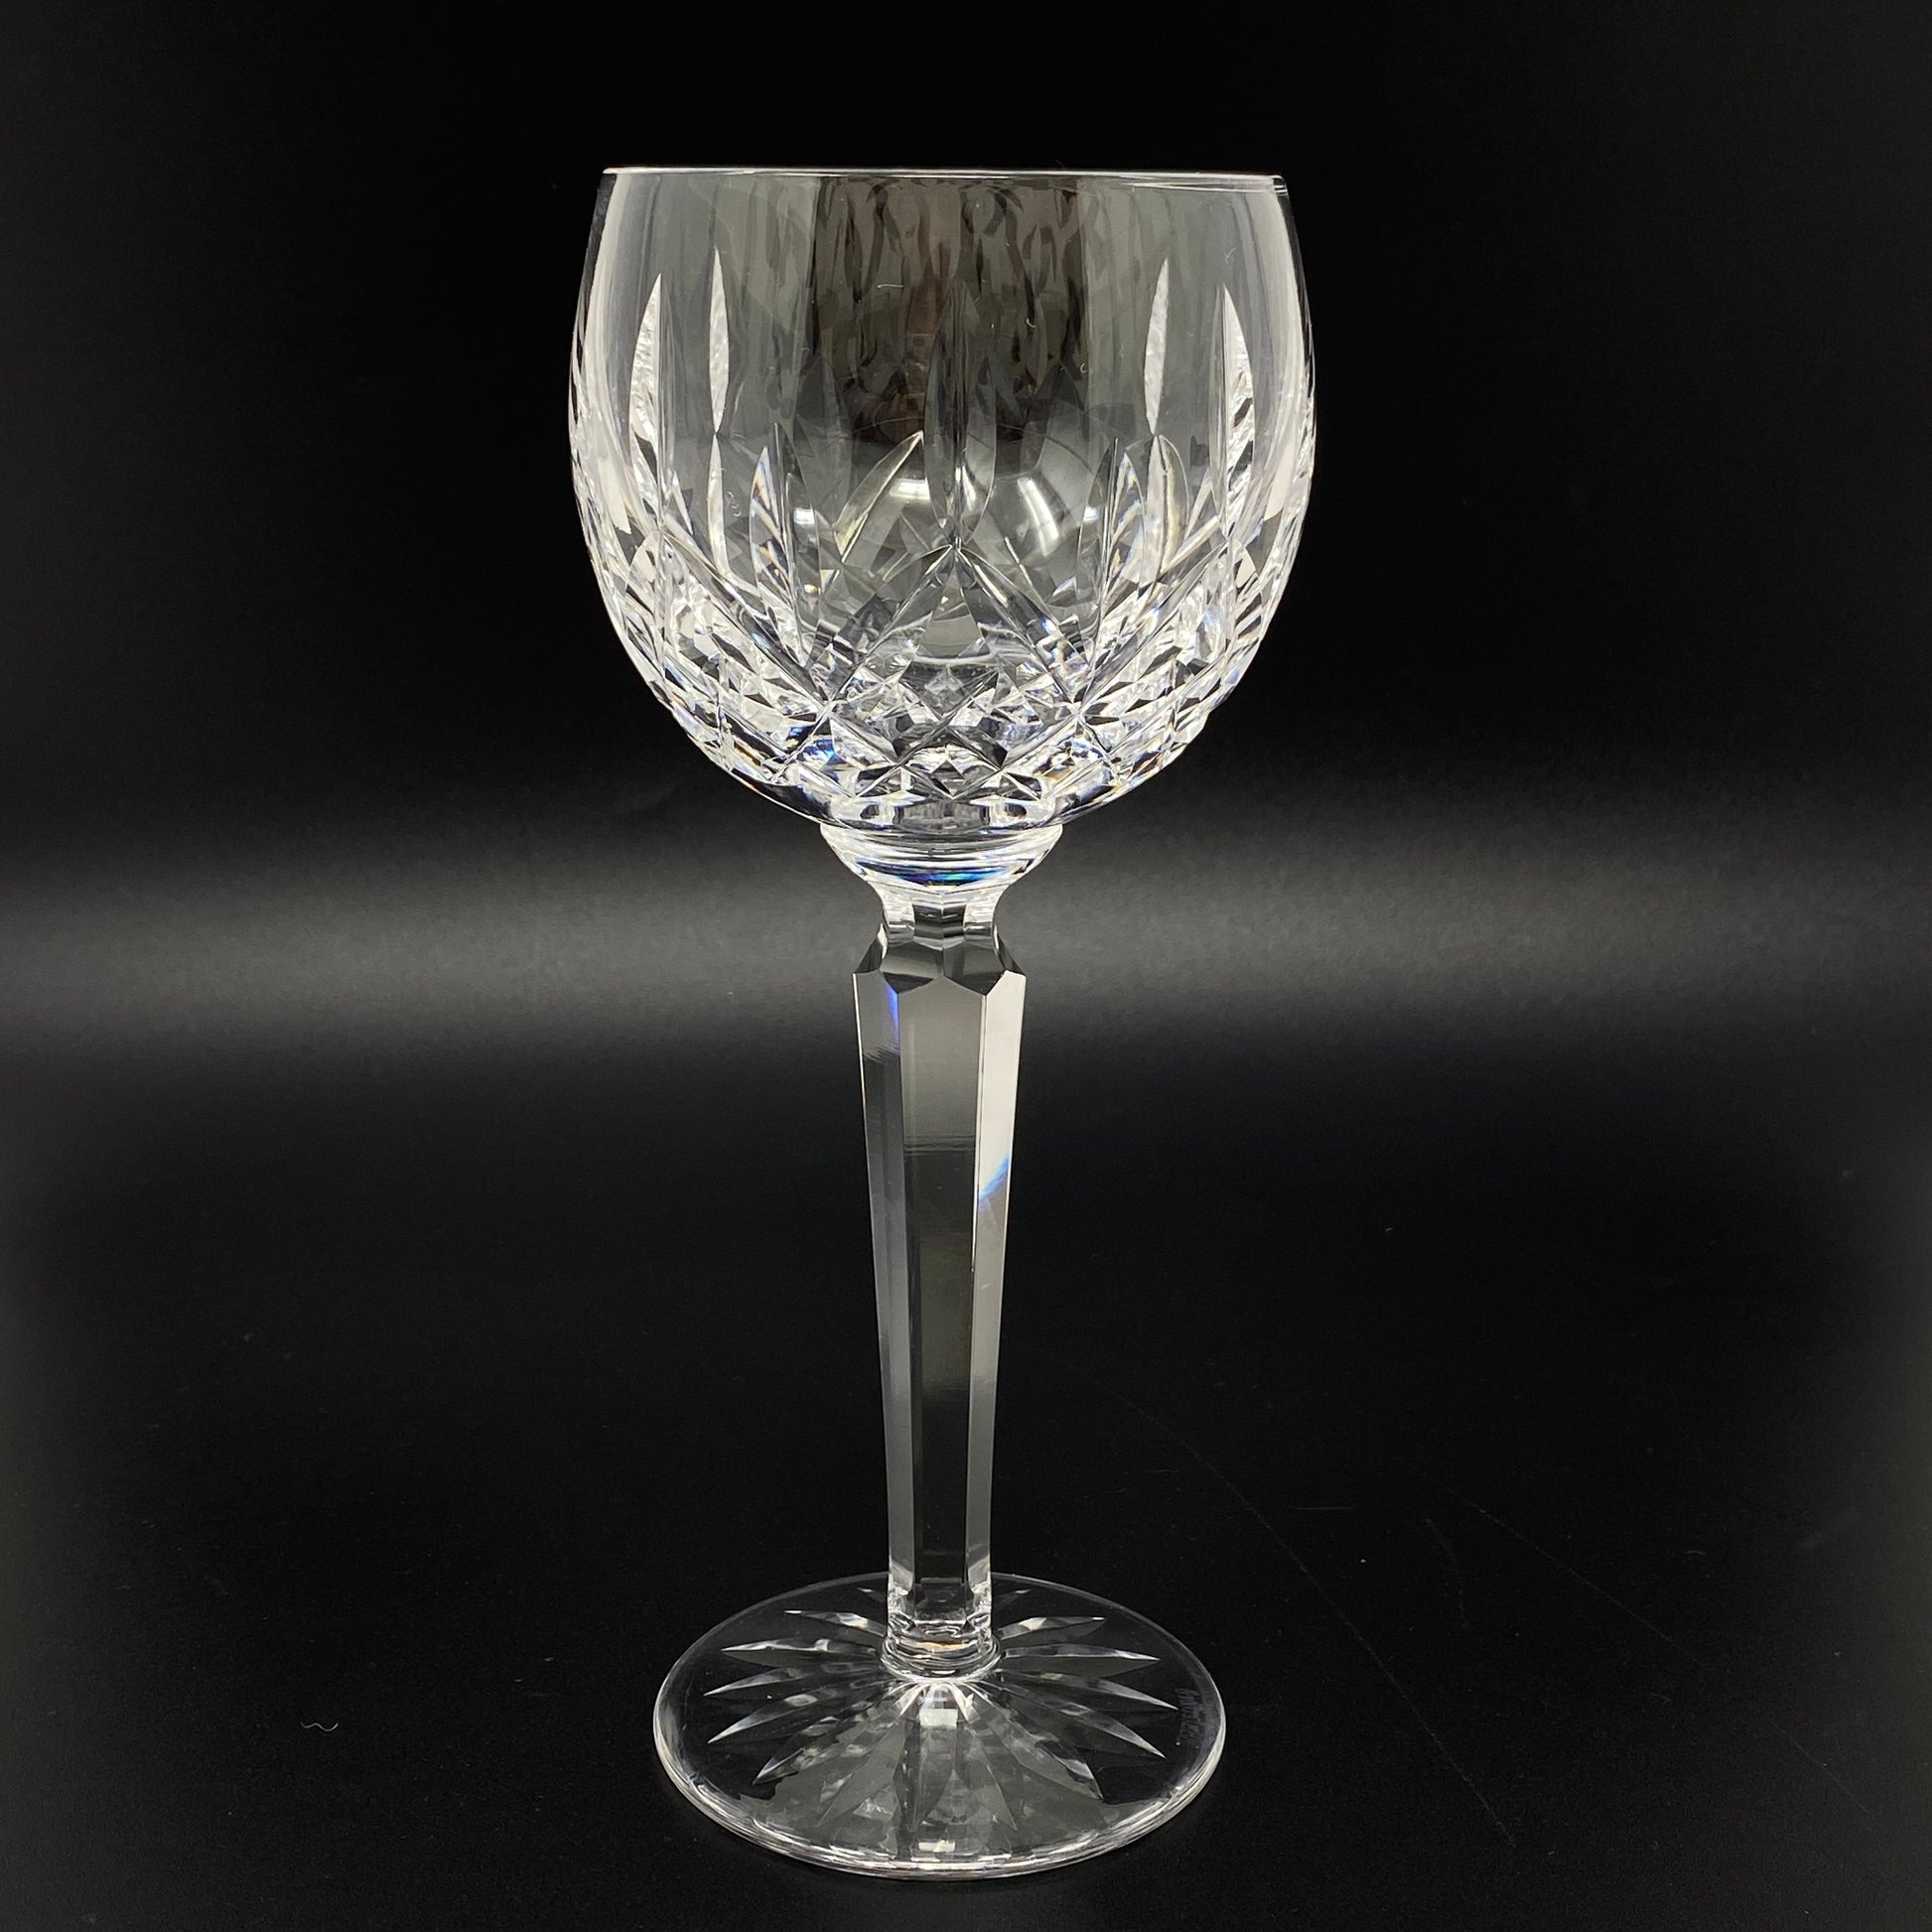 stores discount sale 3 Waterford Lismore Brandy Glasses 12 oz